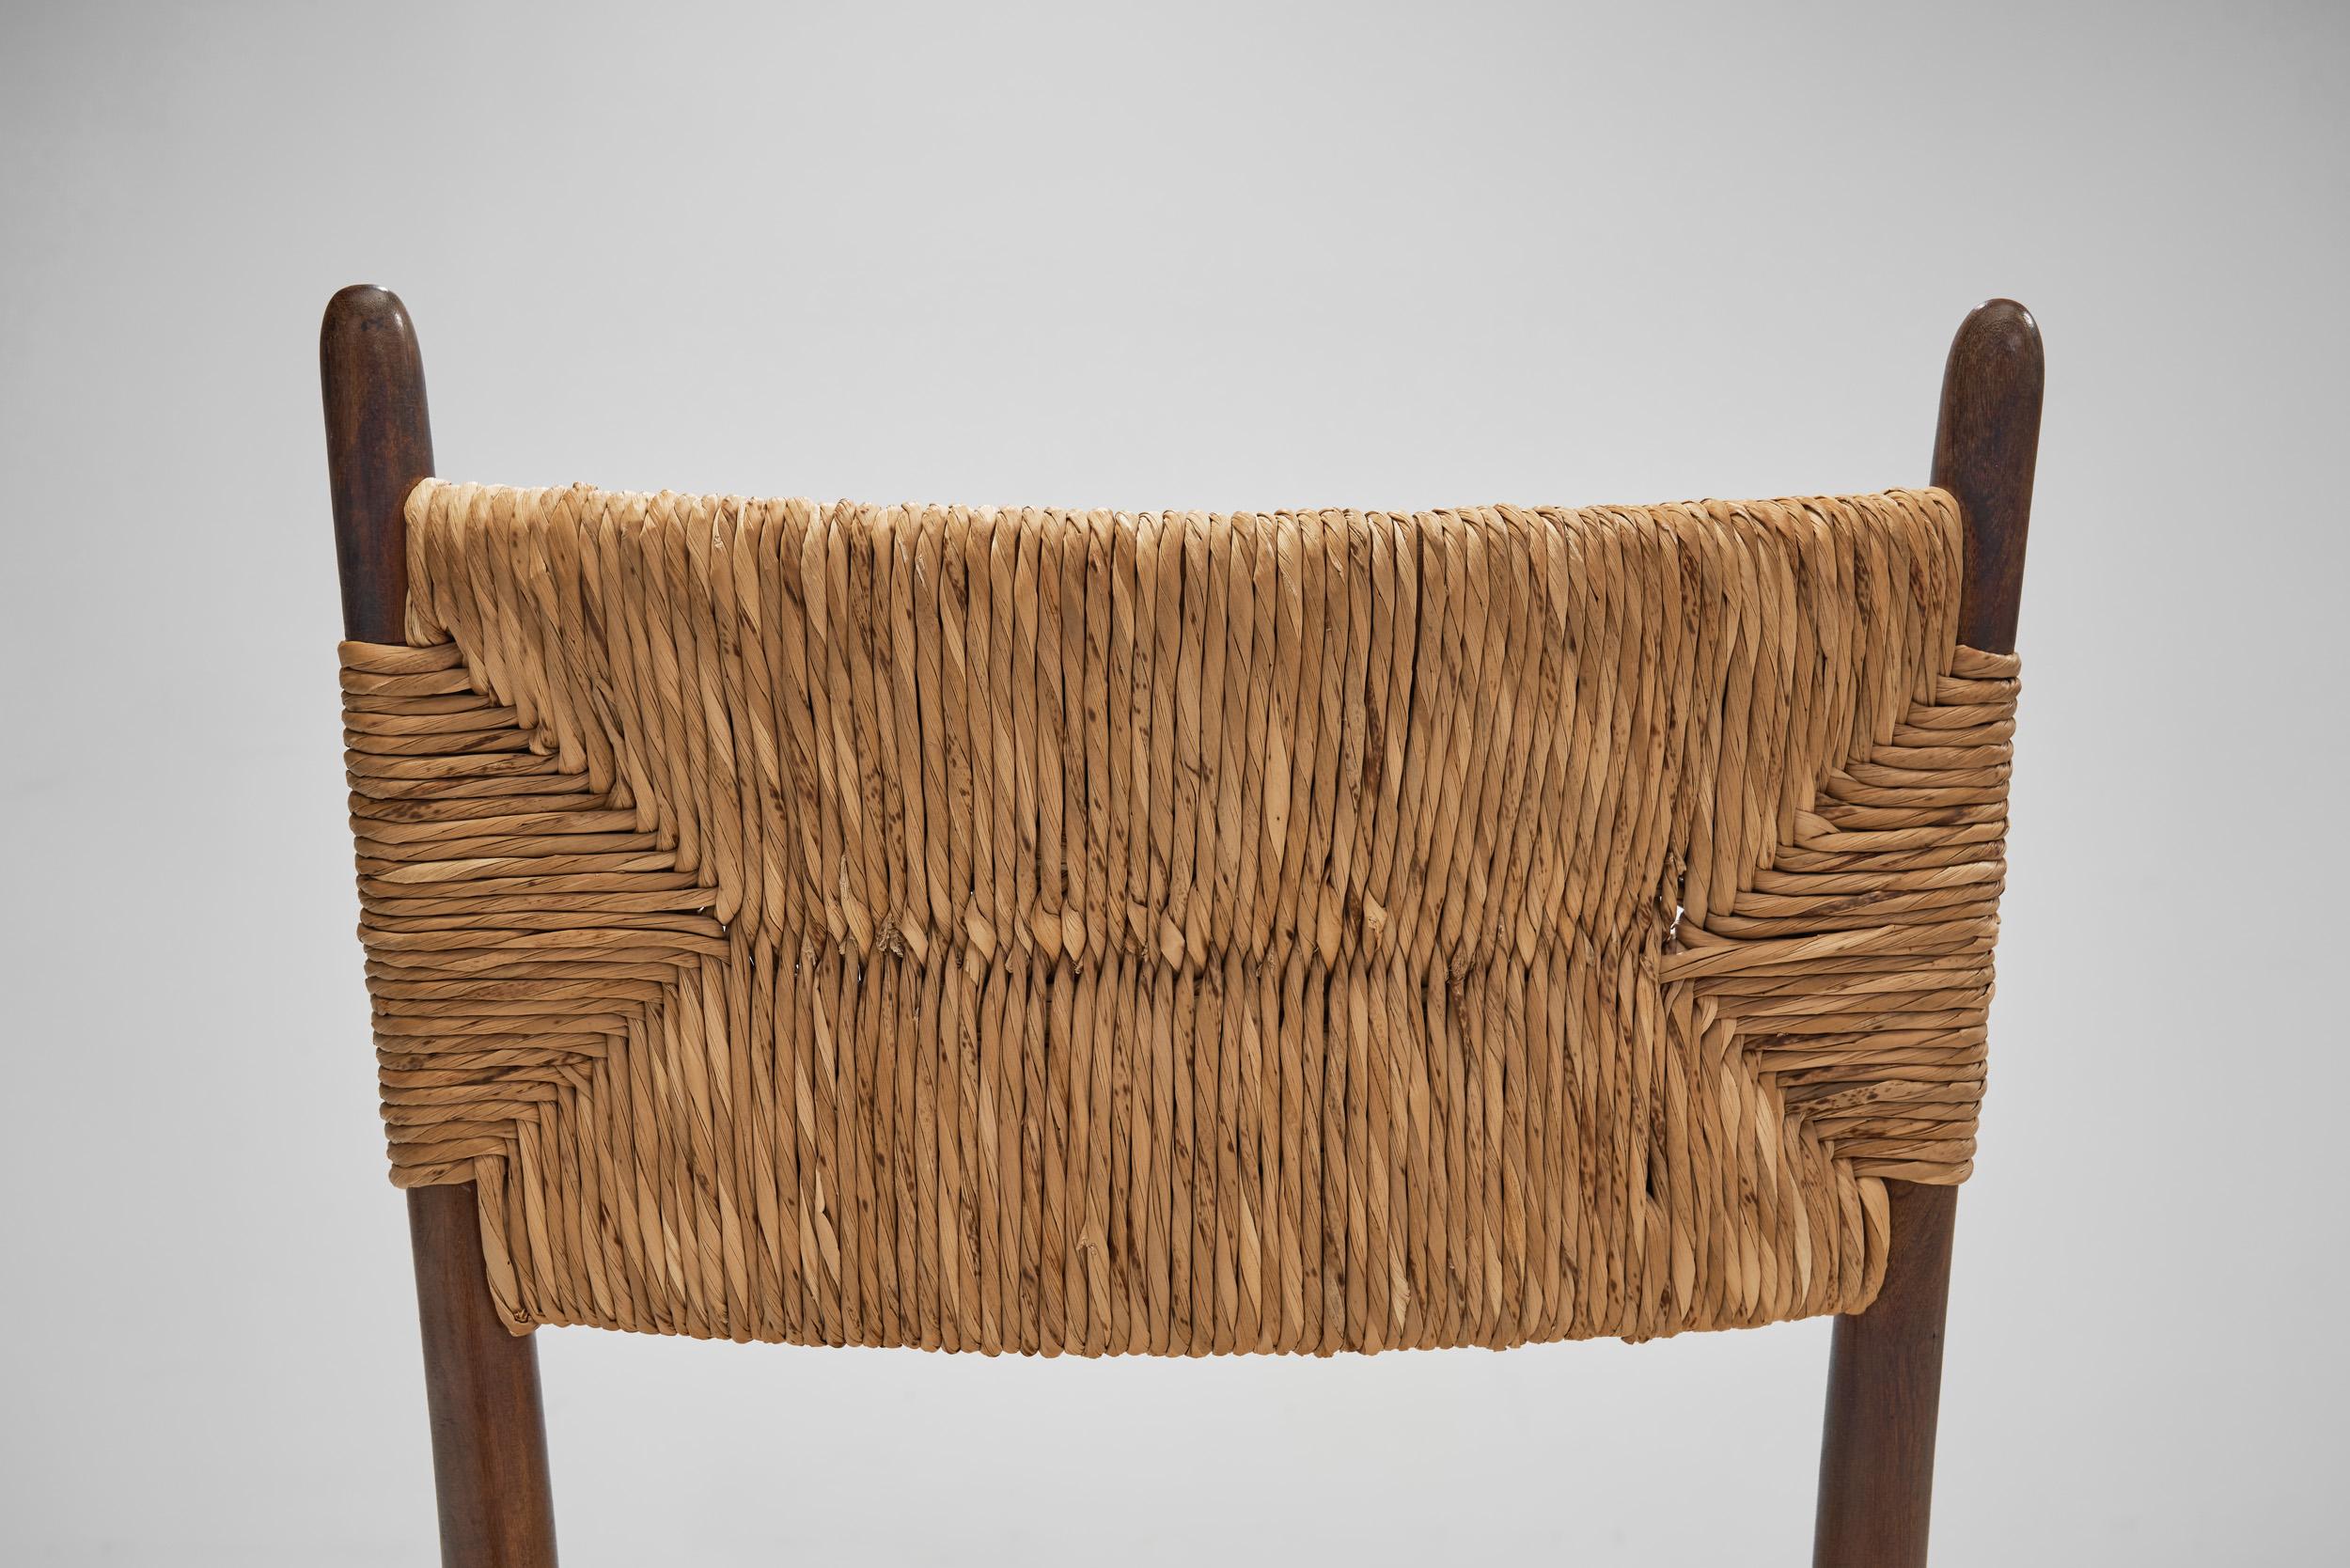 A Set of Four Dining Chairs with Woven Straw Seats and Backs, Europe ca 1950s 1